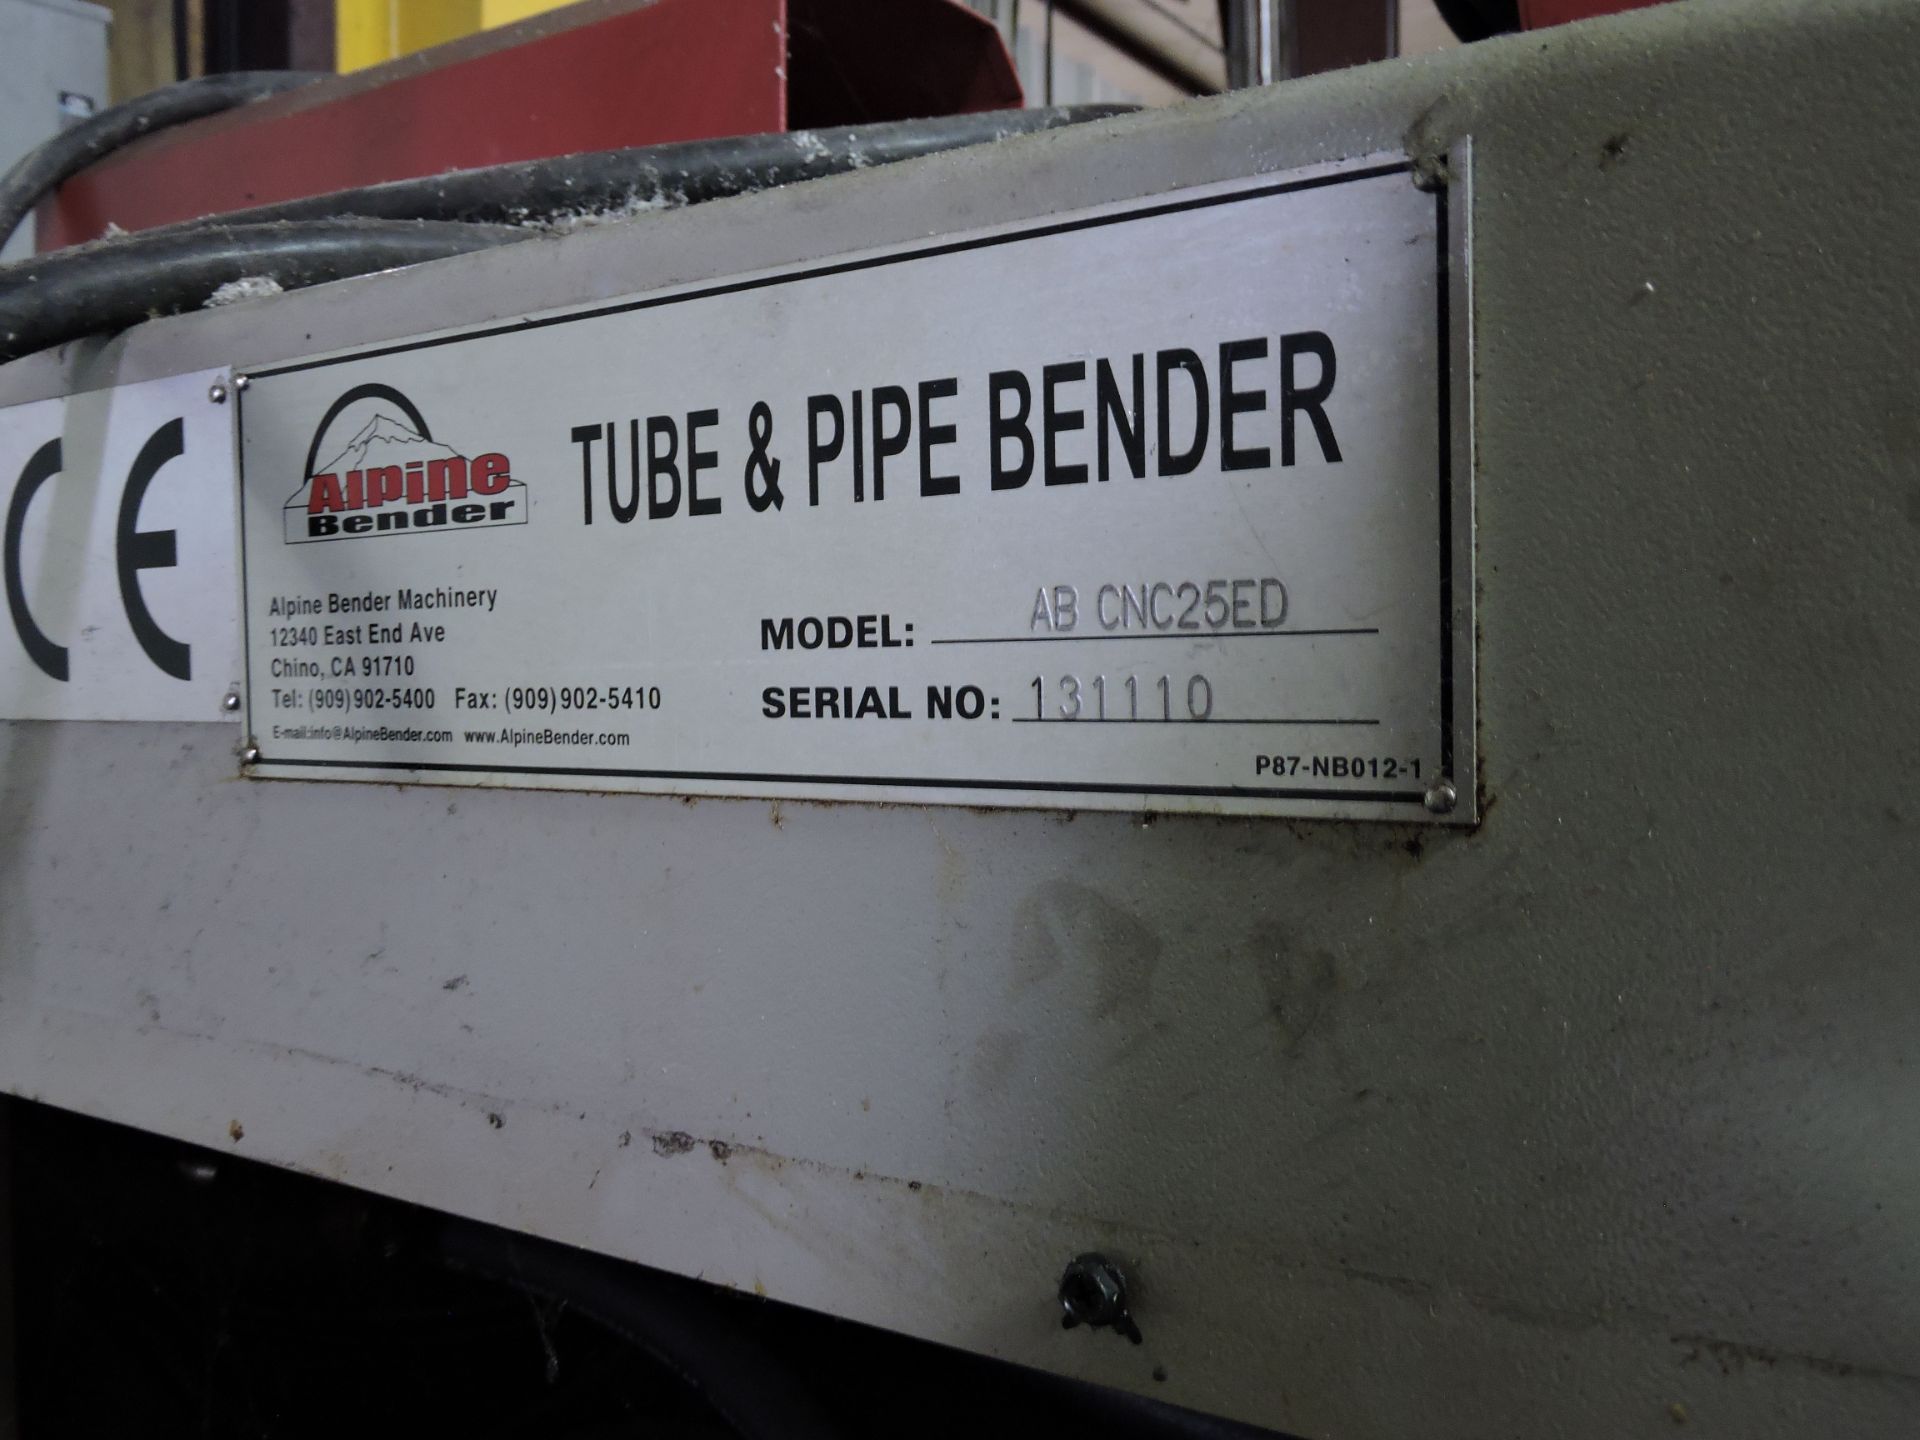 Alpine Tube and Pipe Bender 3/4" Cap. Model AB, CNC 25ED, SN 131110, with Pipe Feed Unit - Image 8 of 8